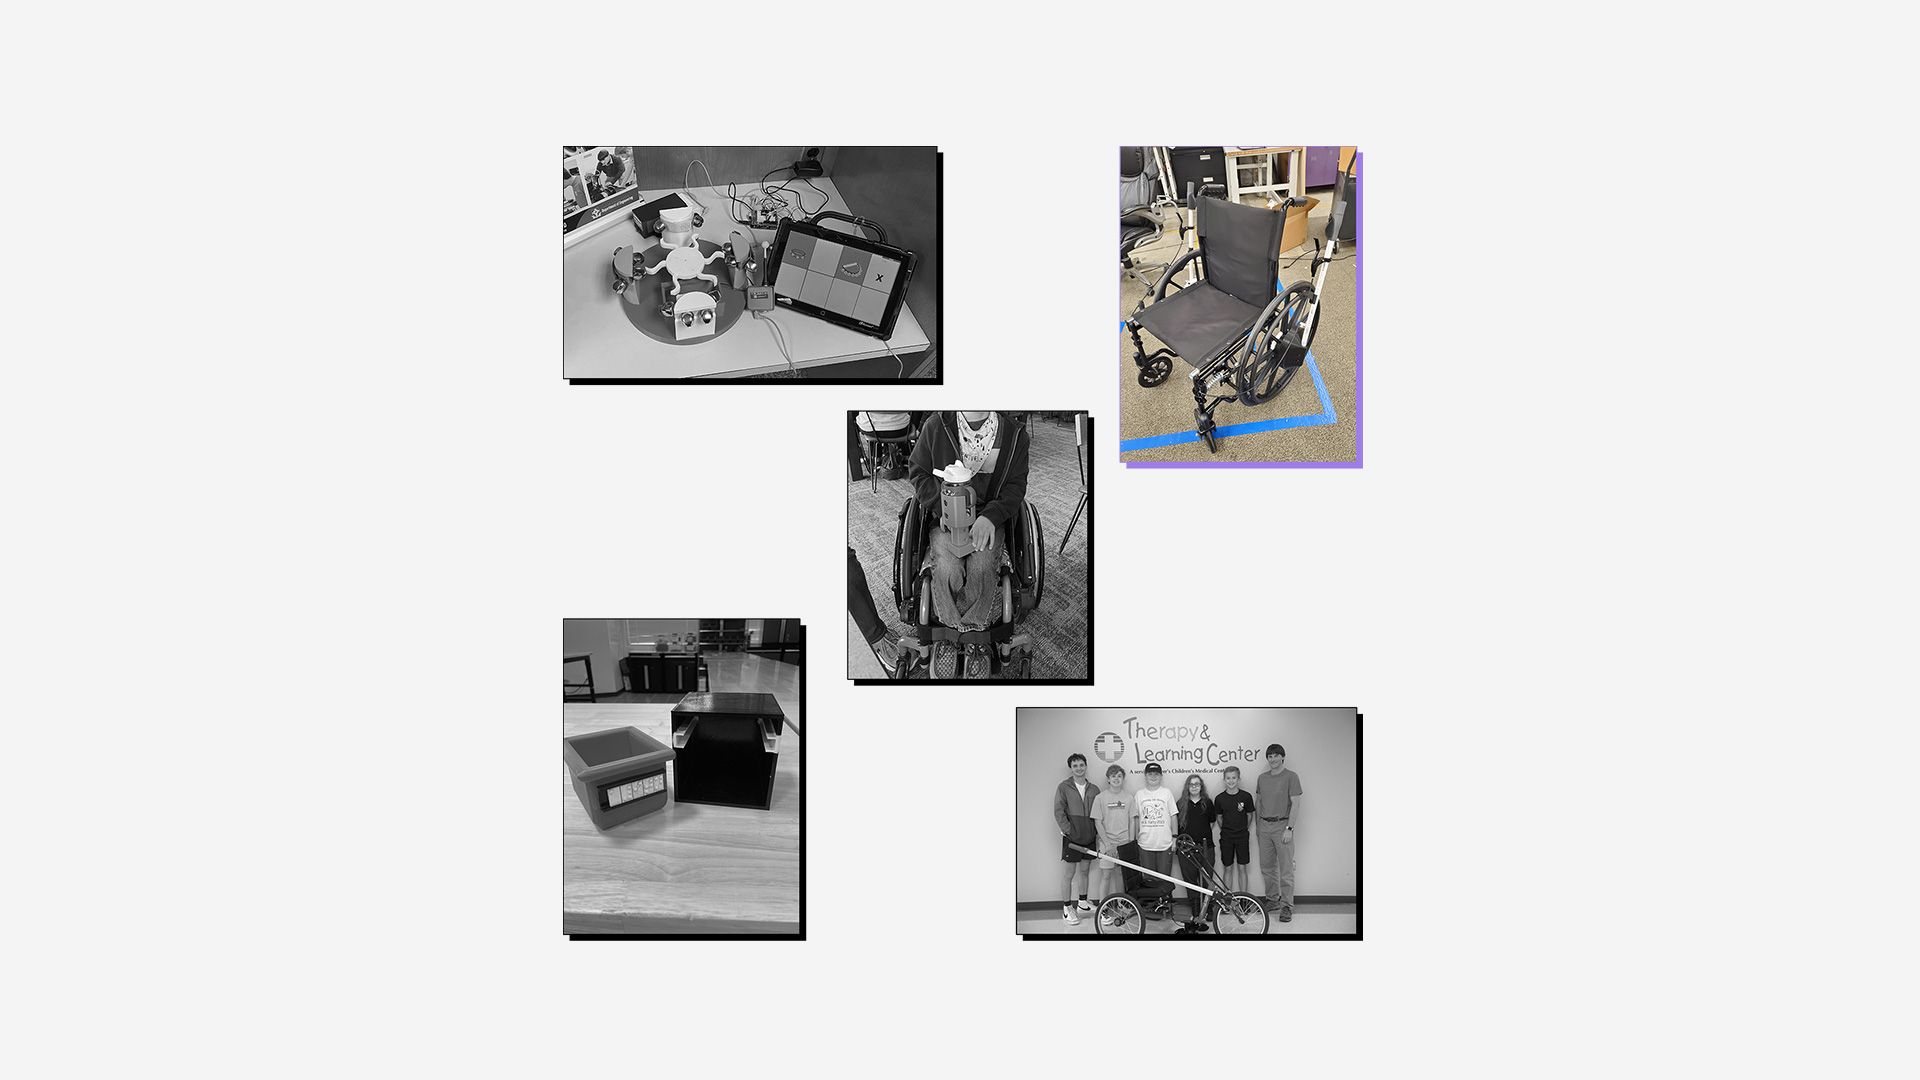 Collage of 3D printed assistive devices with winning entry (wheelchair lever) highlighted.